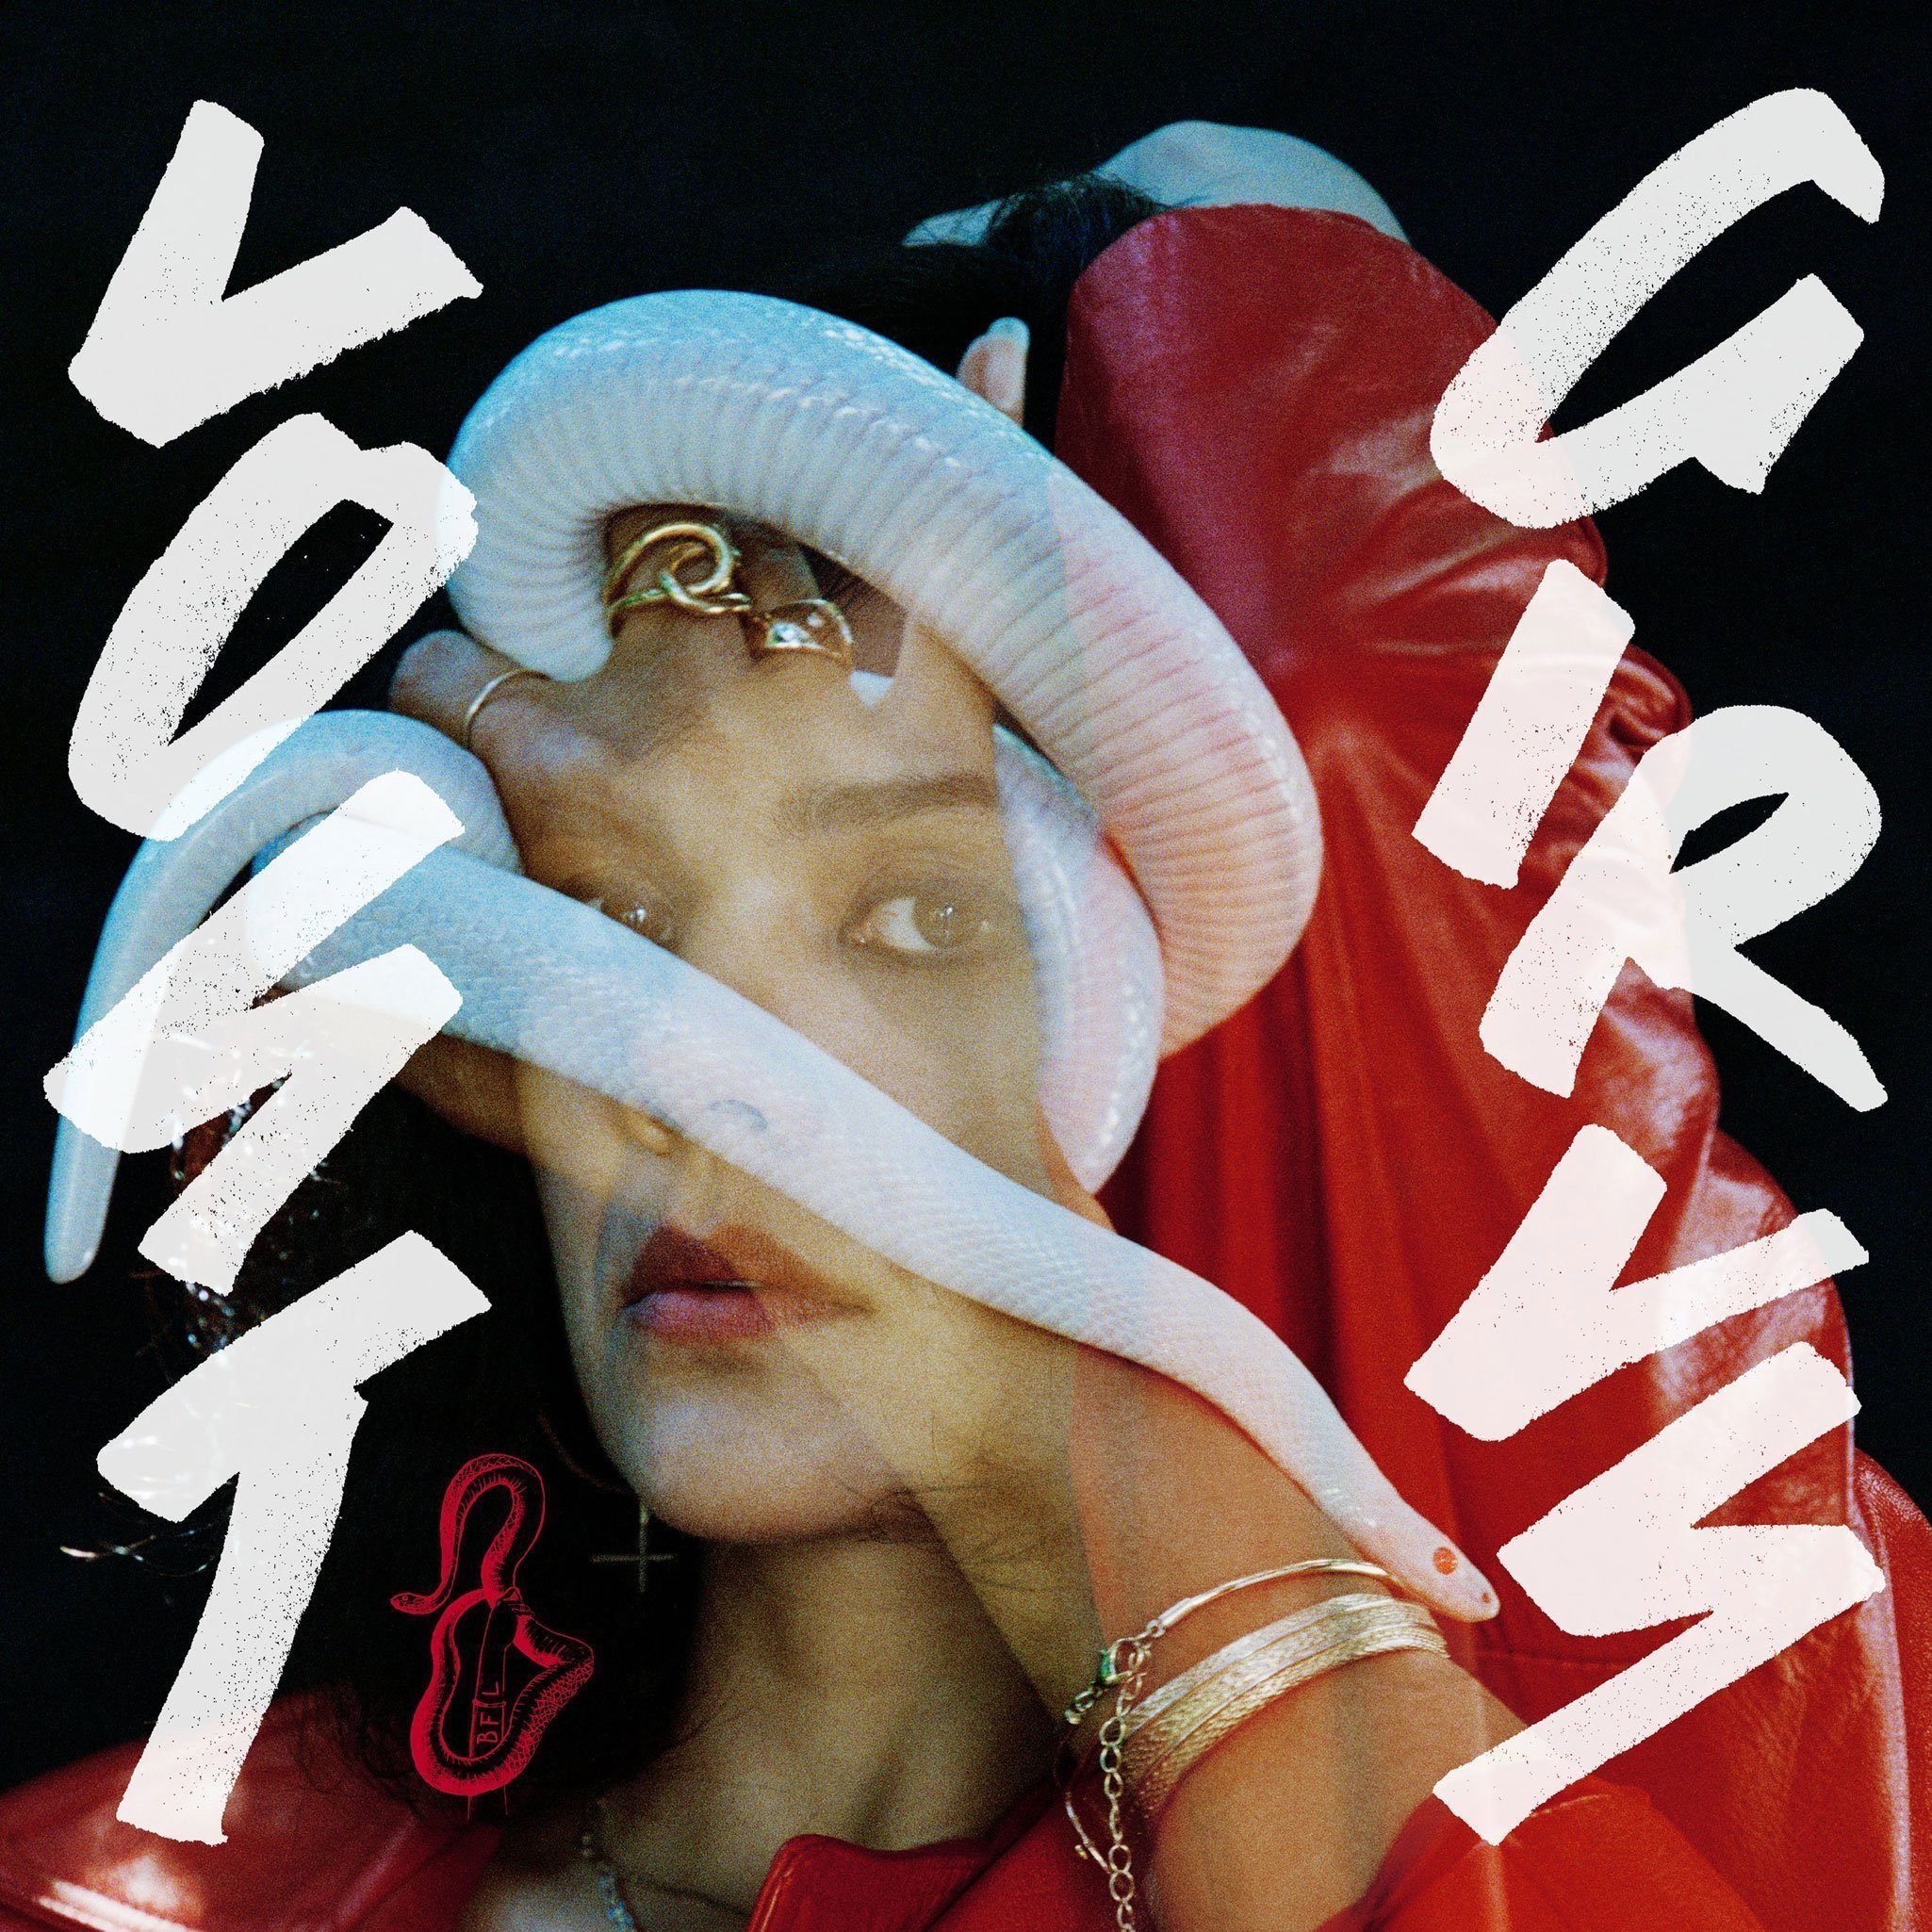 ALBUM REVIEW: Bat for Lashes - Lost Girls 